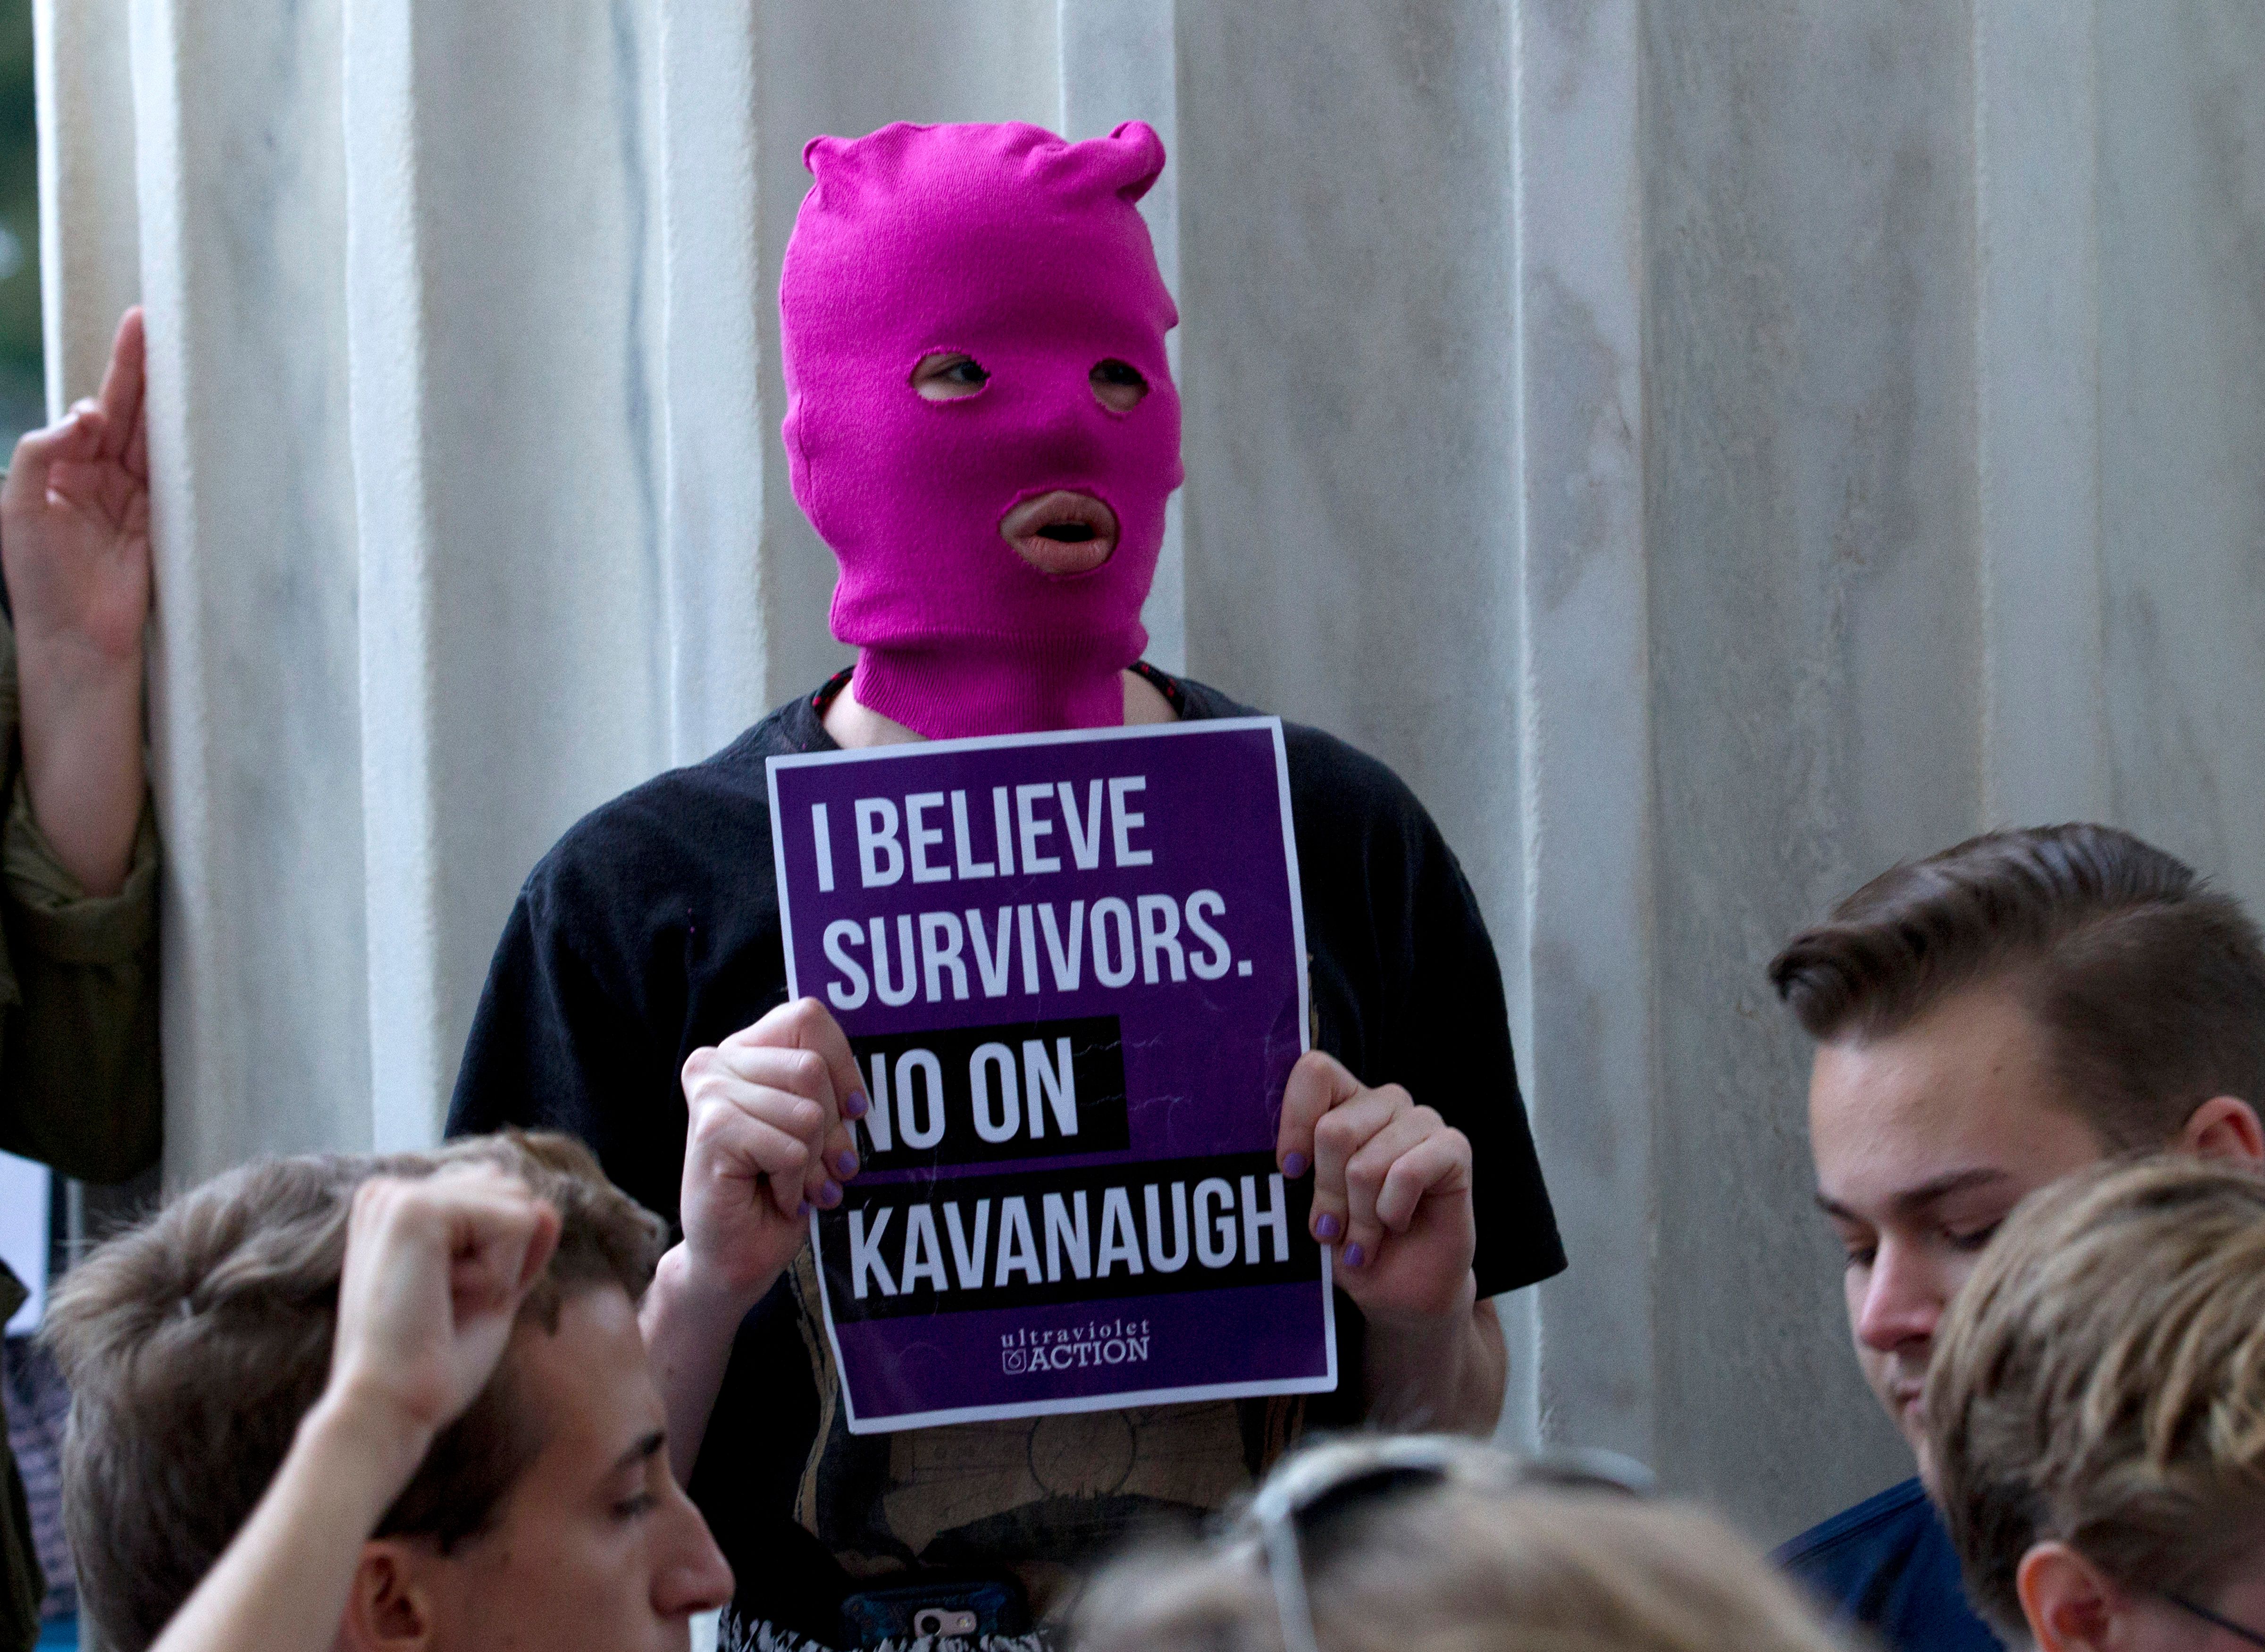 Demonstrators take the steps of the US Supreme Court to protest against the appointment of Supreme Court nominee Brett Kavanaugh in Washington DC, on October 6, 2018. (Photo by Jose Luis Magana / AFP) (Photo credit should read JOSE LUIS MAGANA/AFP via Getty Images)